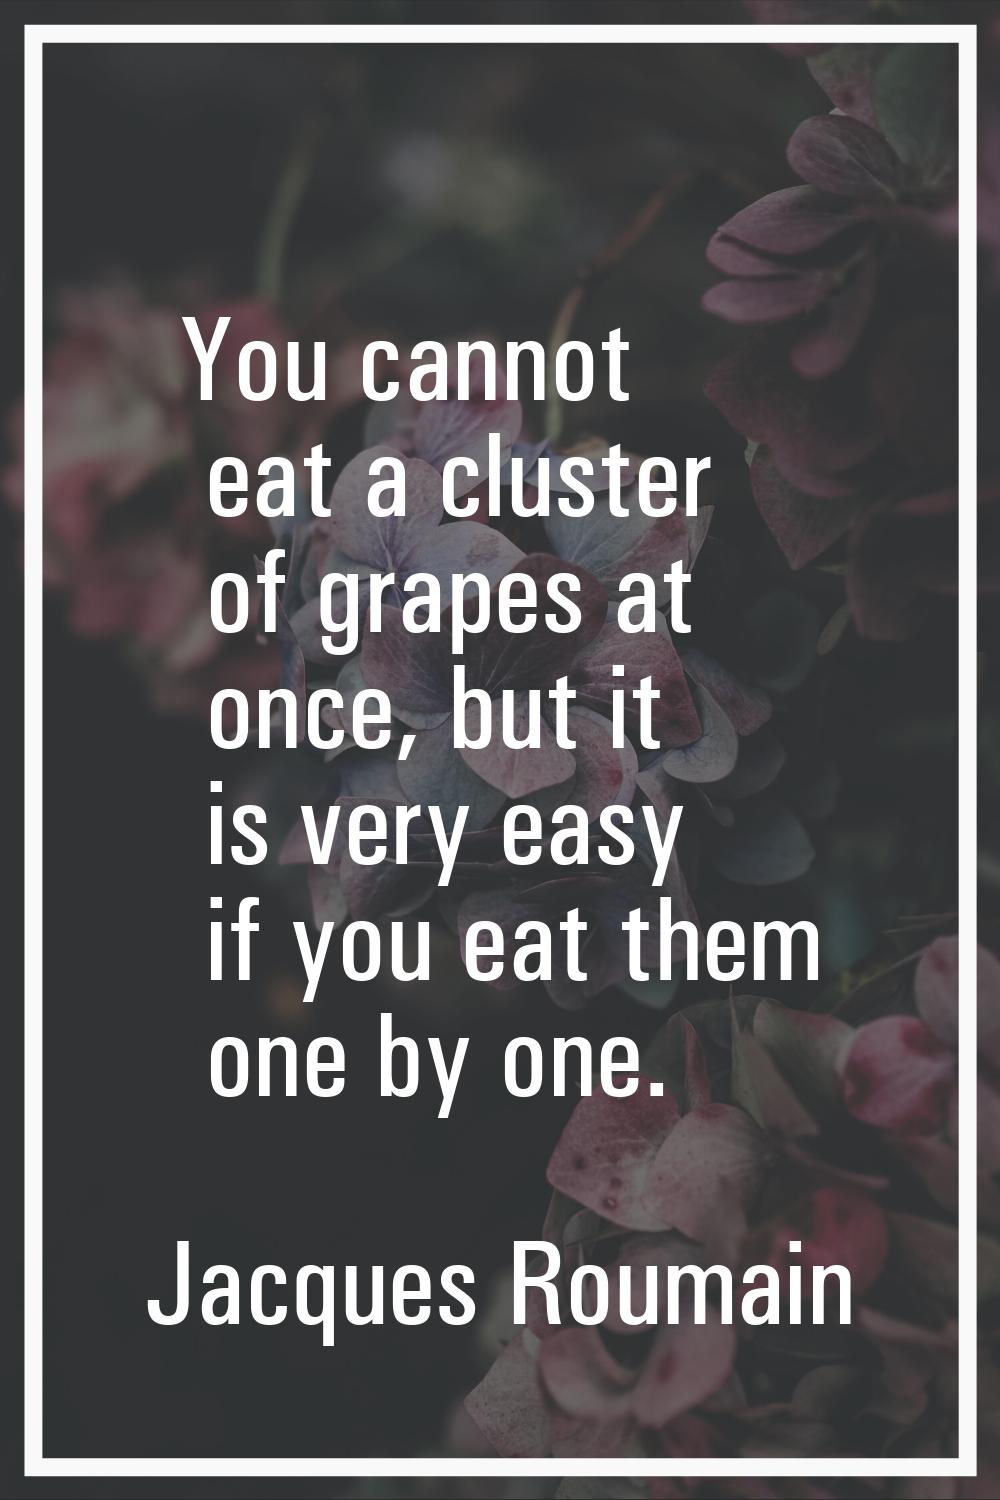 You cannot eat a cluster of grapes at once, but it is very easy if you eat them one by one.